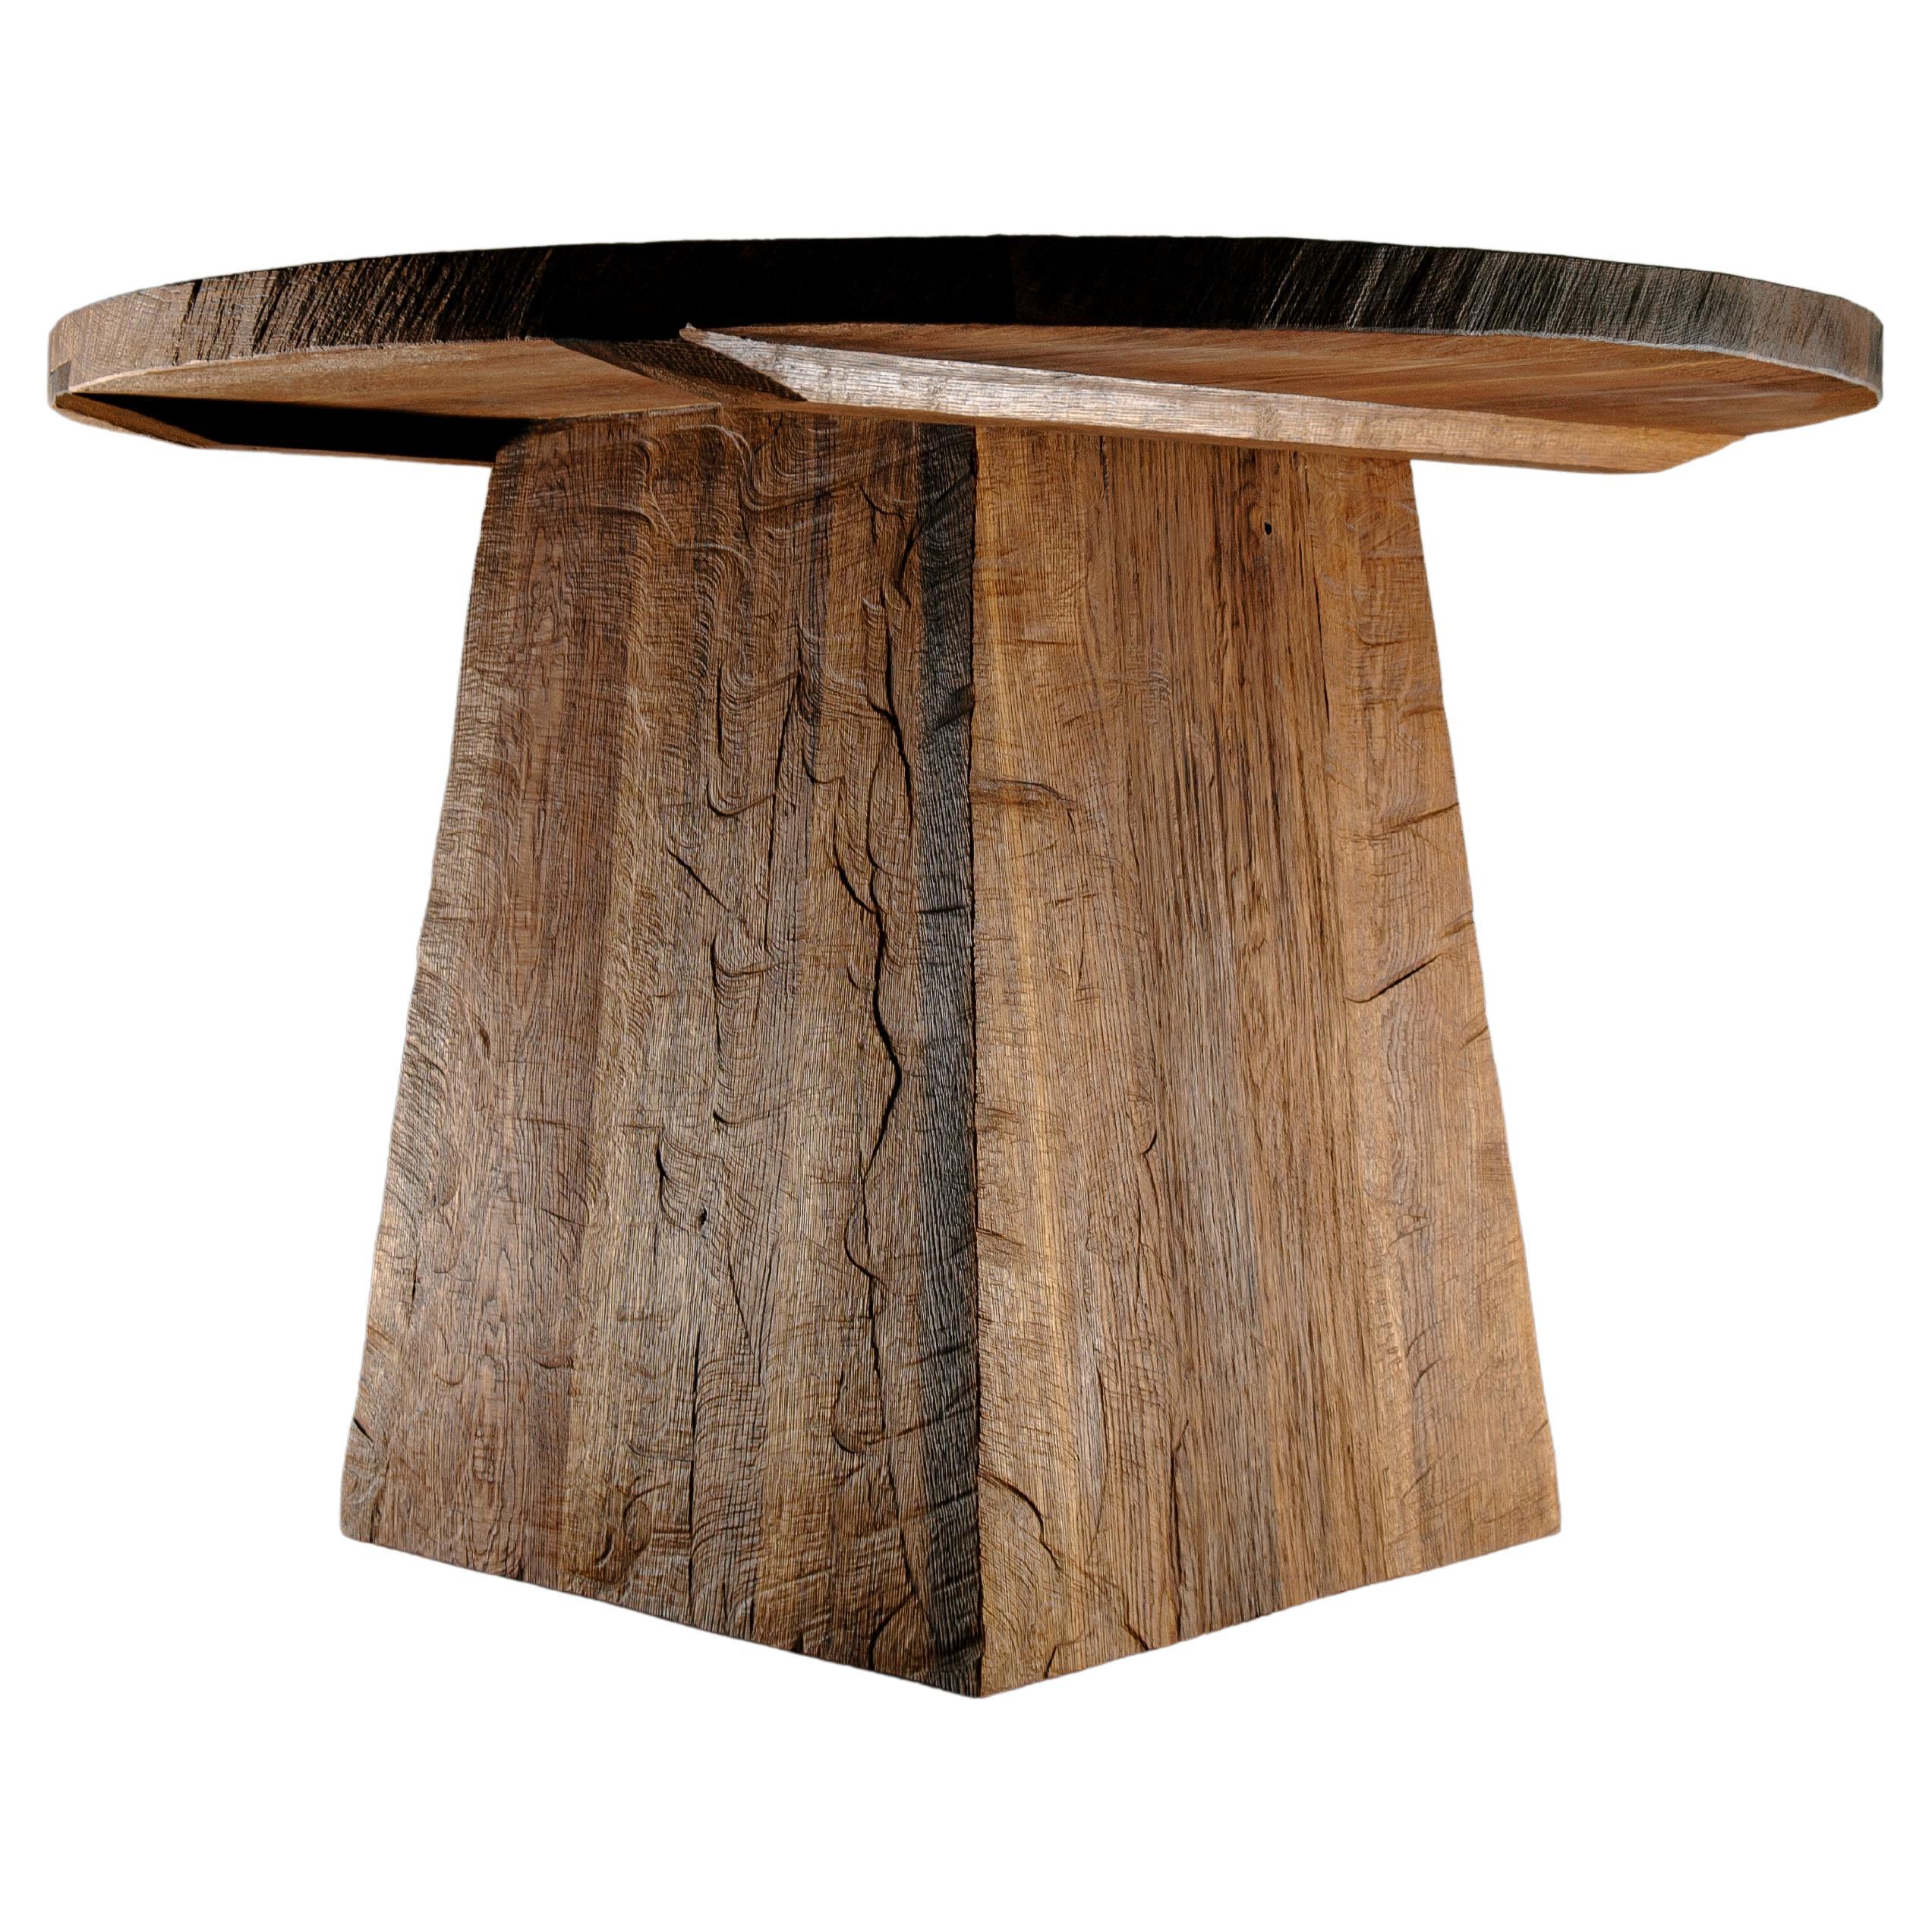 Brutalist center table N1 in Solid Oakwood

Dimensions: 
140 x 76 cm

Unique piece made to order.

Founded by artist Denis Milovanov, SÓHA design studio conceives and produces furniture design and decorative objects in solid oak in an